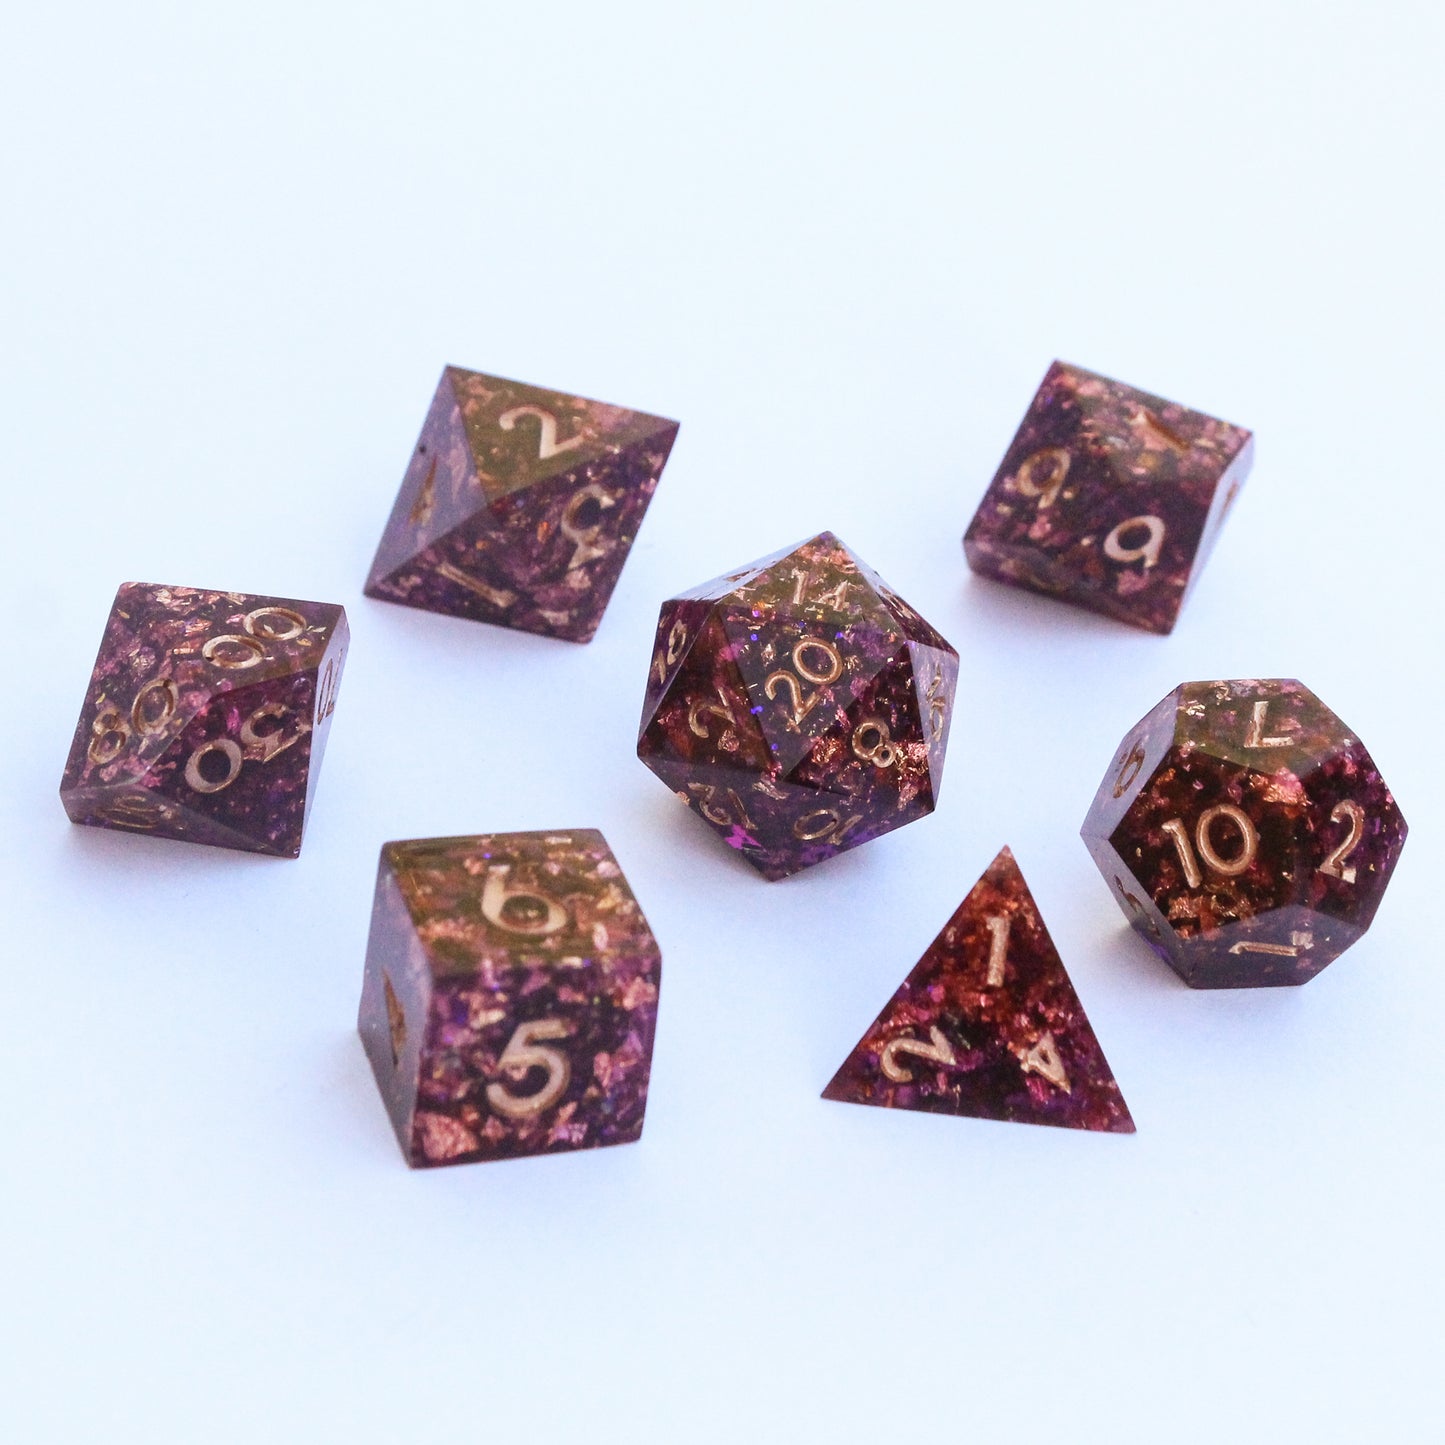 Goodberry - 7-piece Polyhedral Dice Set